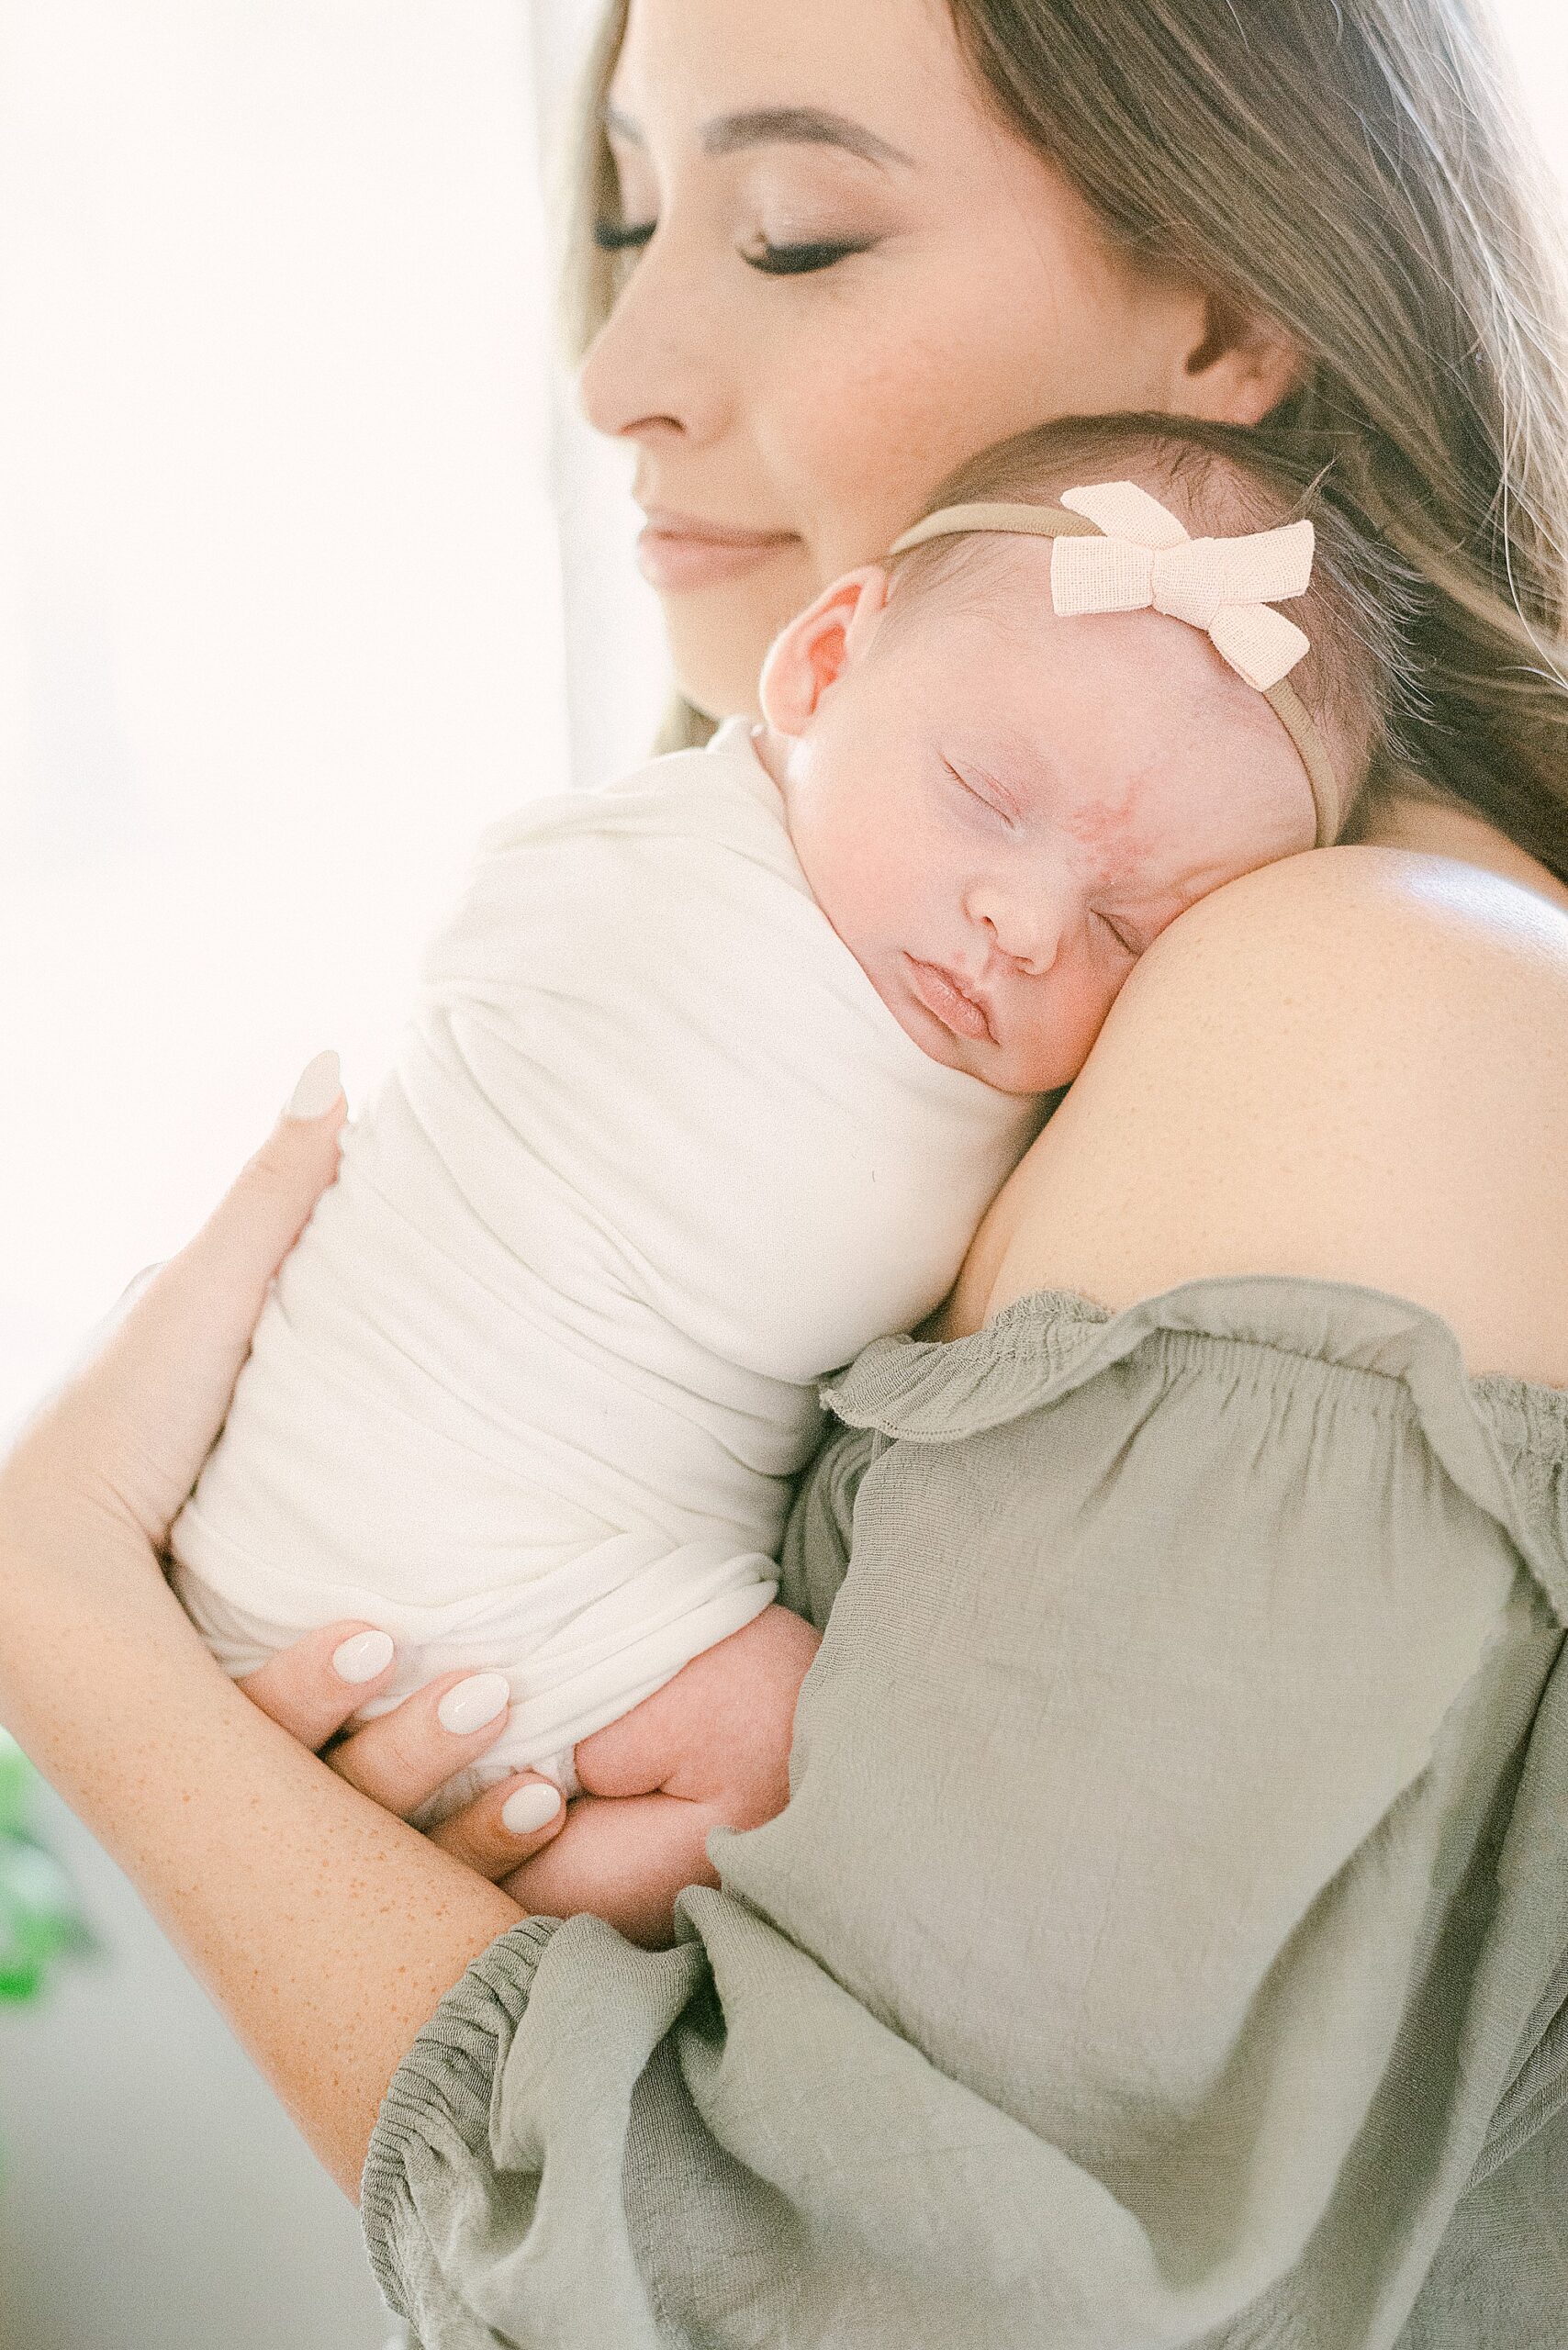 Mom with closed eyes and soft smile is holding newborn baby girl with her head resting on her shoulders.